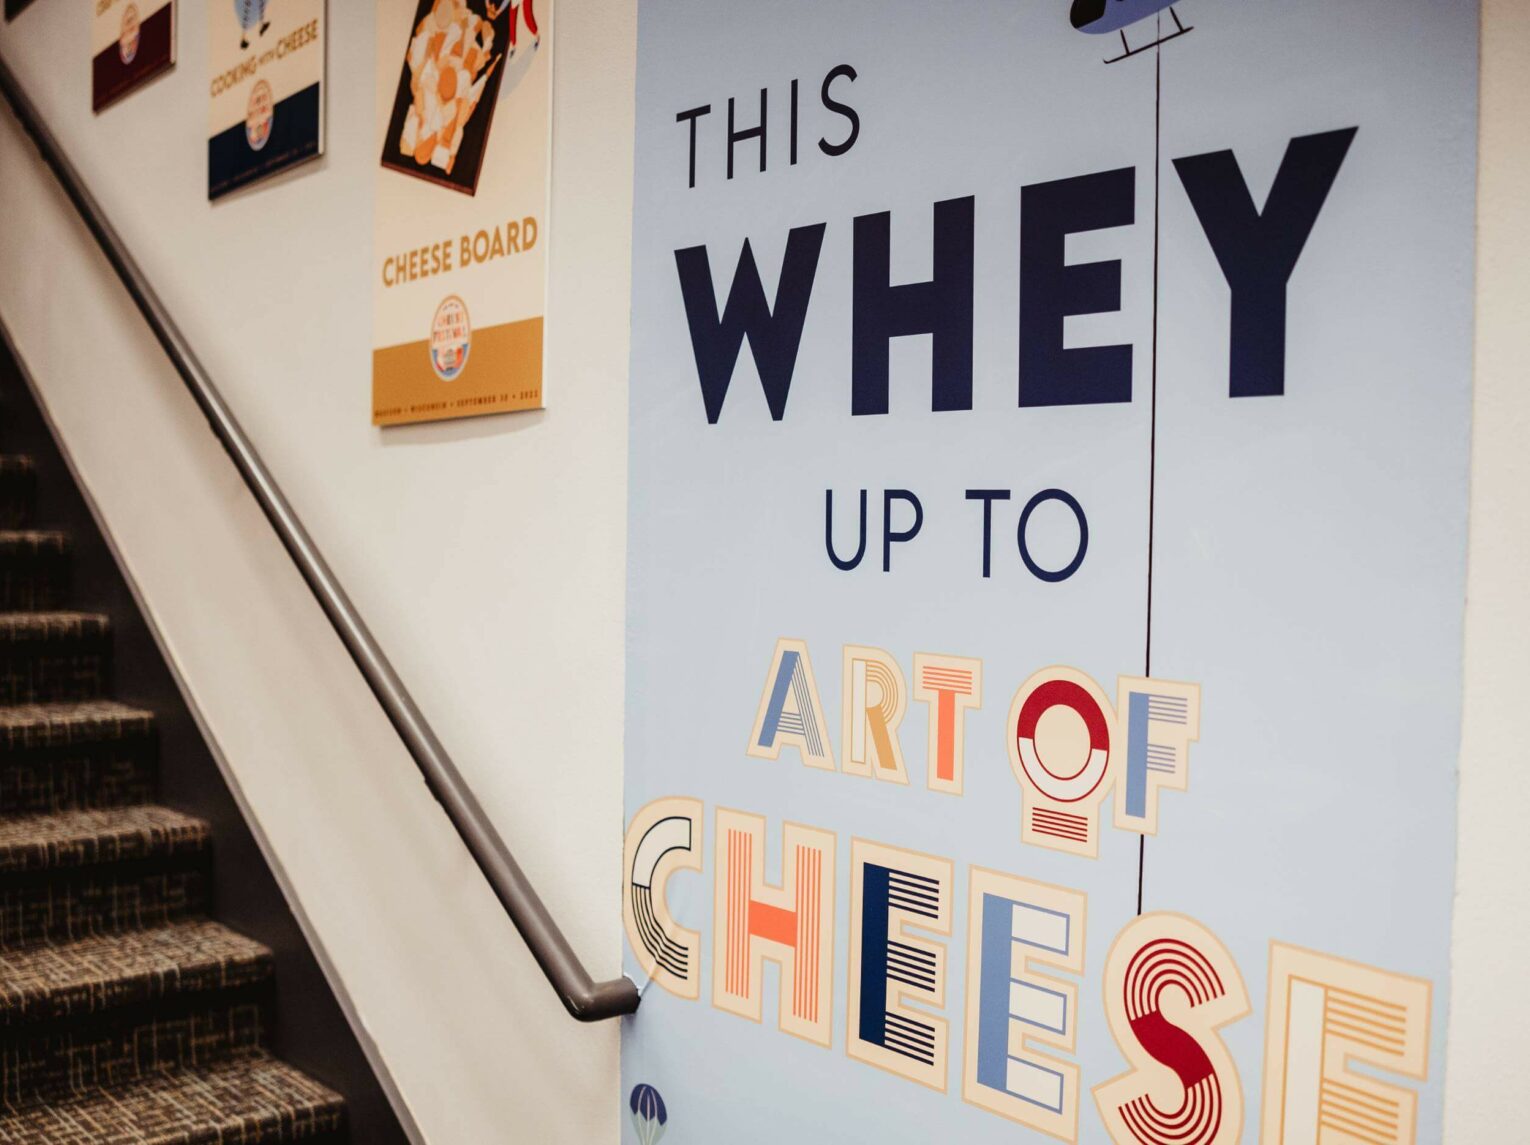 Signage: This Whey Up to Art of Cheese